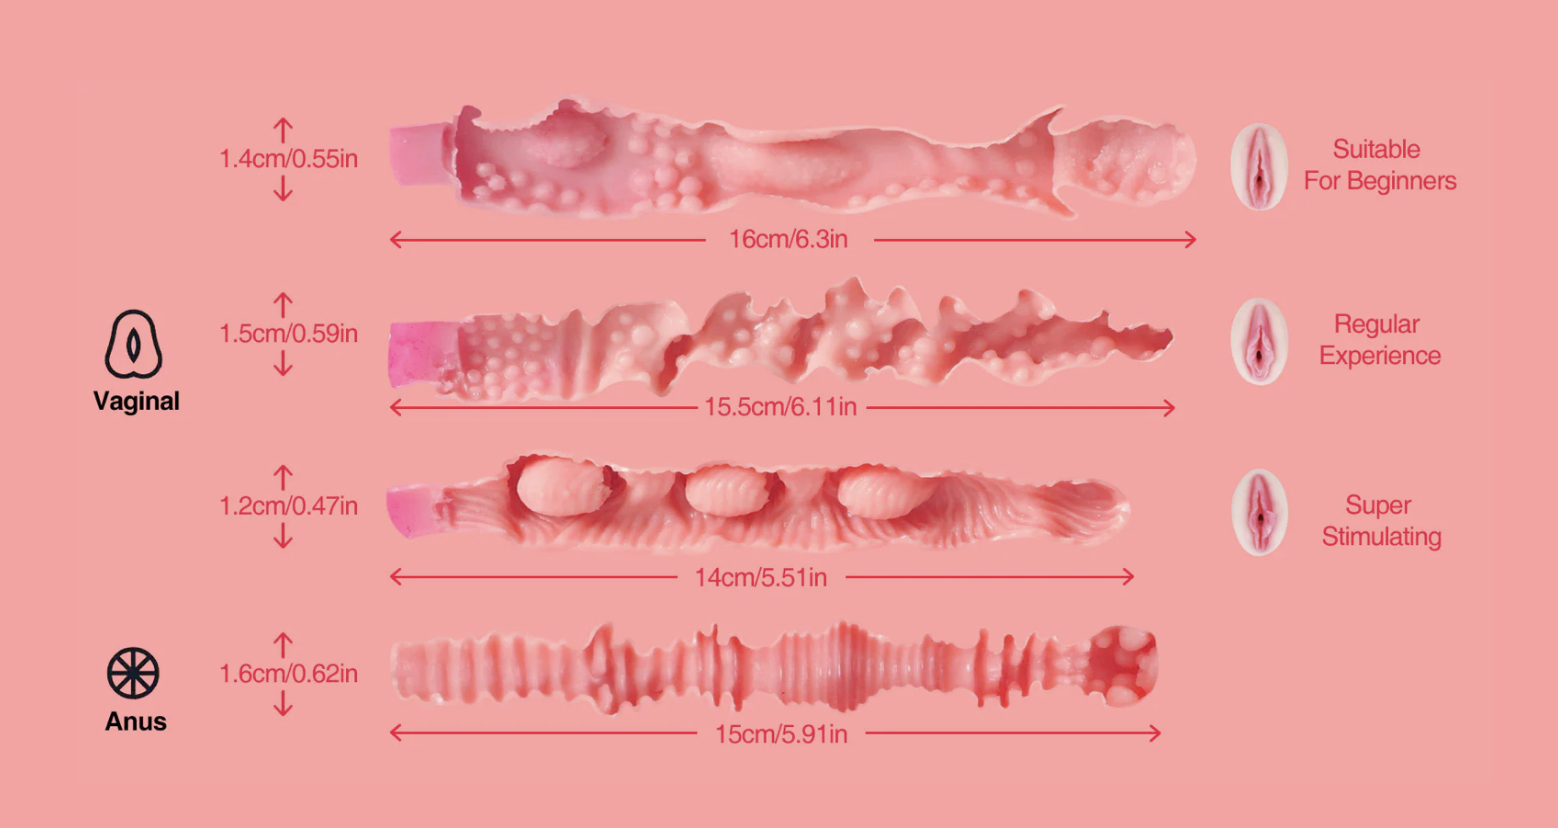 A graphic showing the different vaginal inserts and how they look on the inside with various textures.